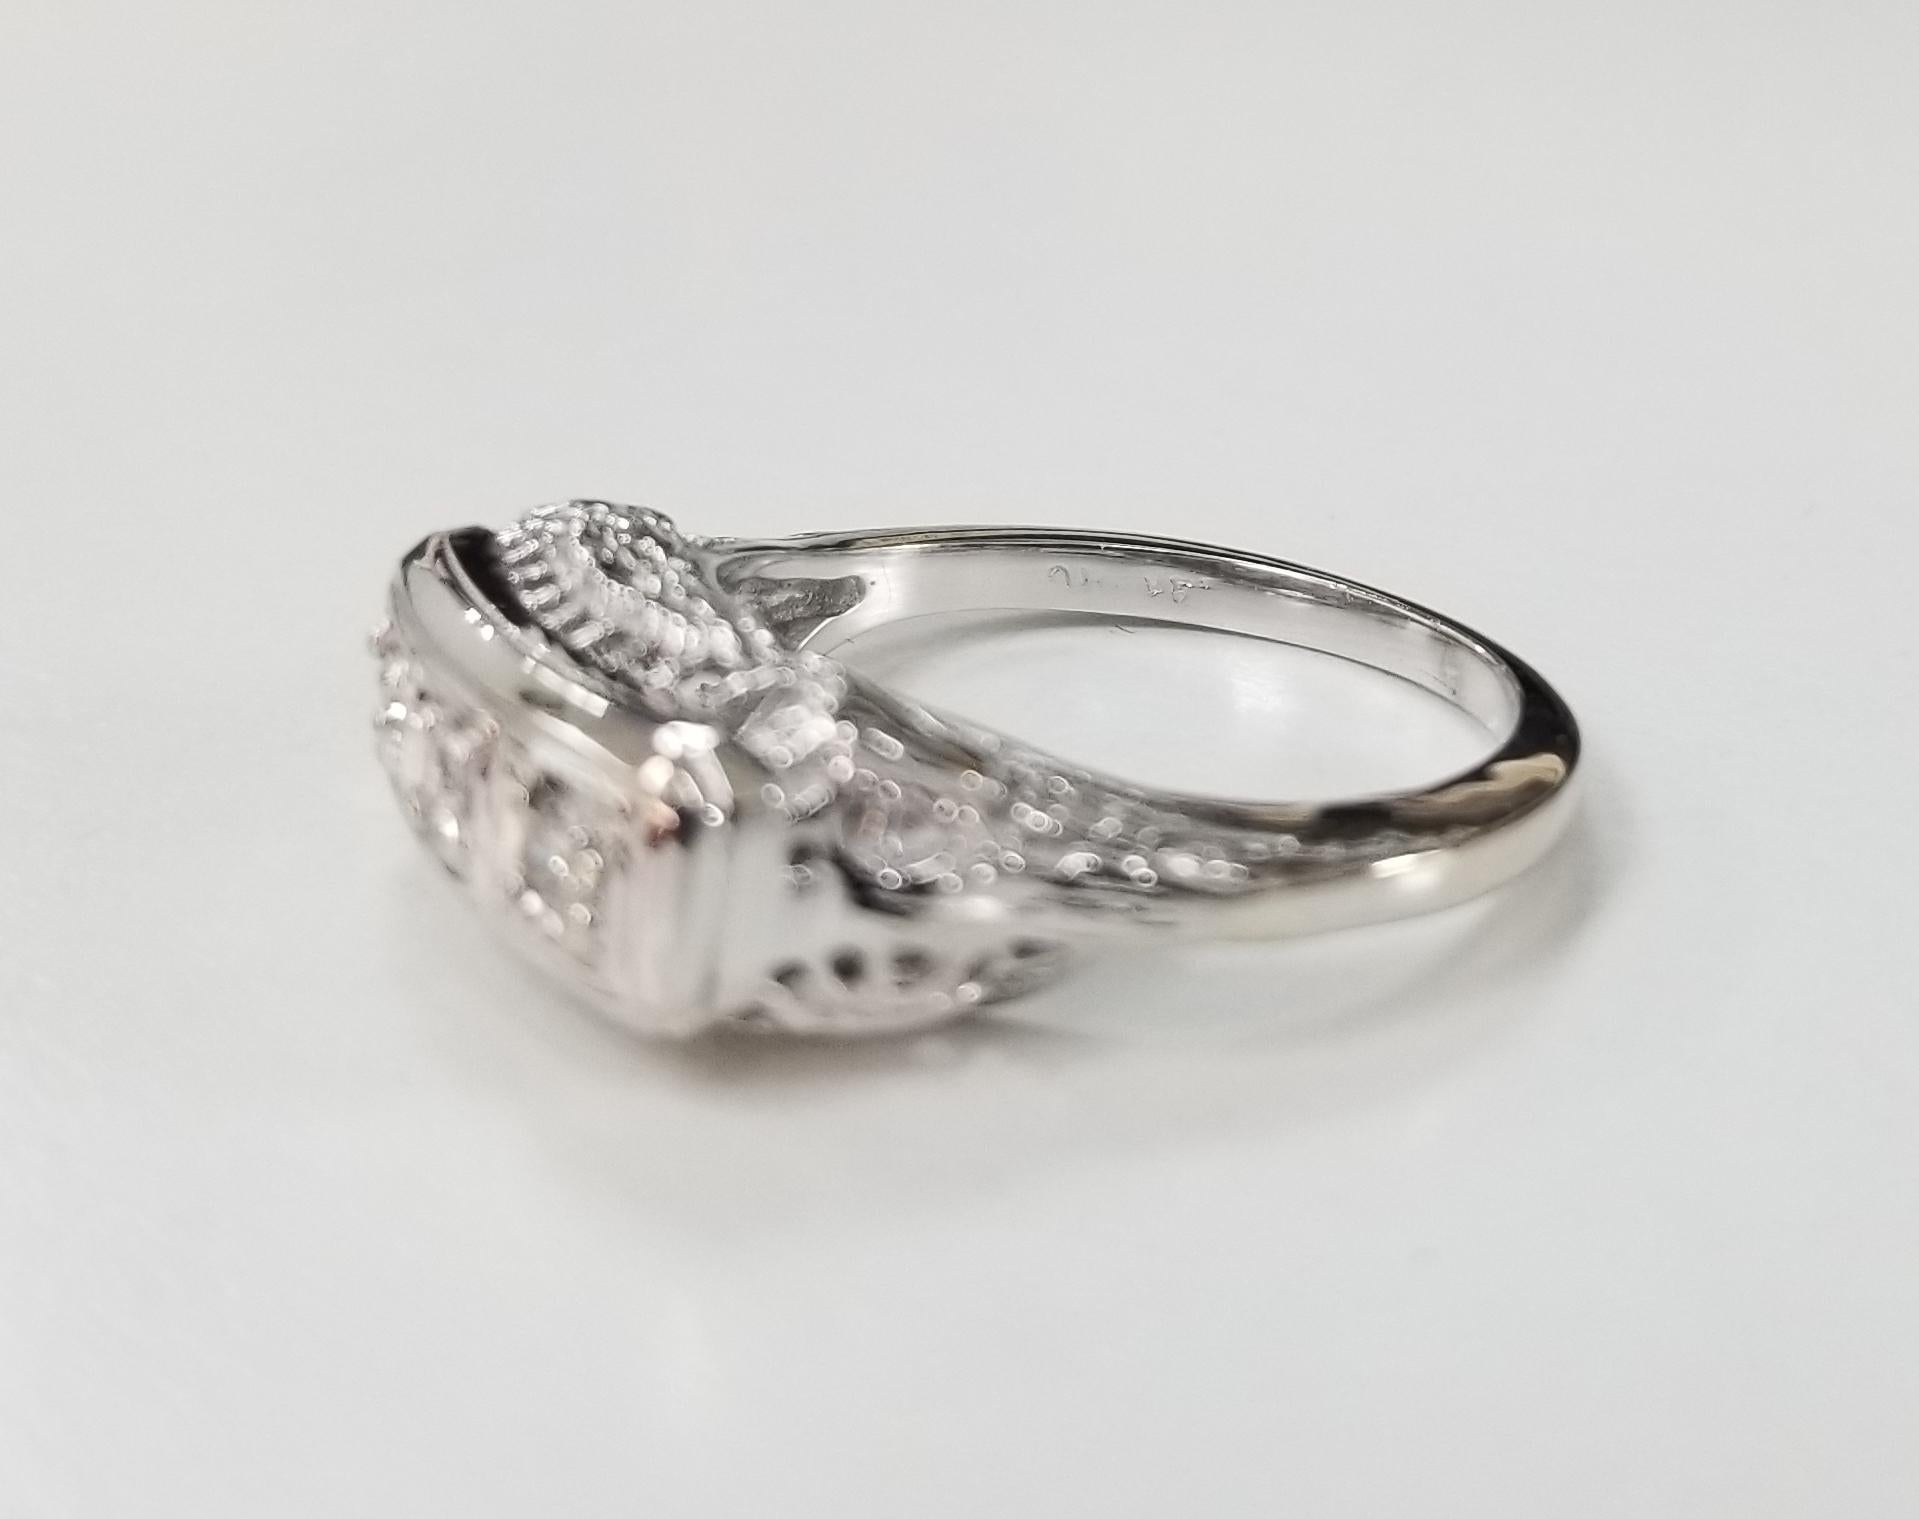 14 karat Art Deco Style 3 stone diamond filigree ring, containing 3 old single cut diamonds of very fine quality weighing .15pts. ring is 7 and can be size to fit for free.